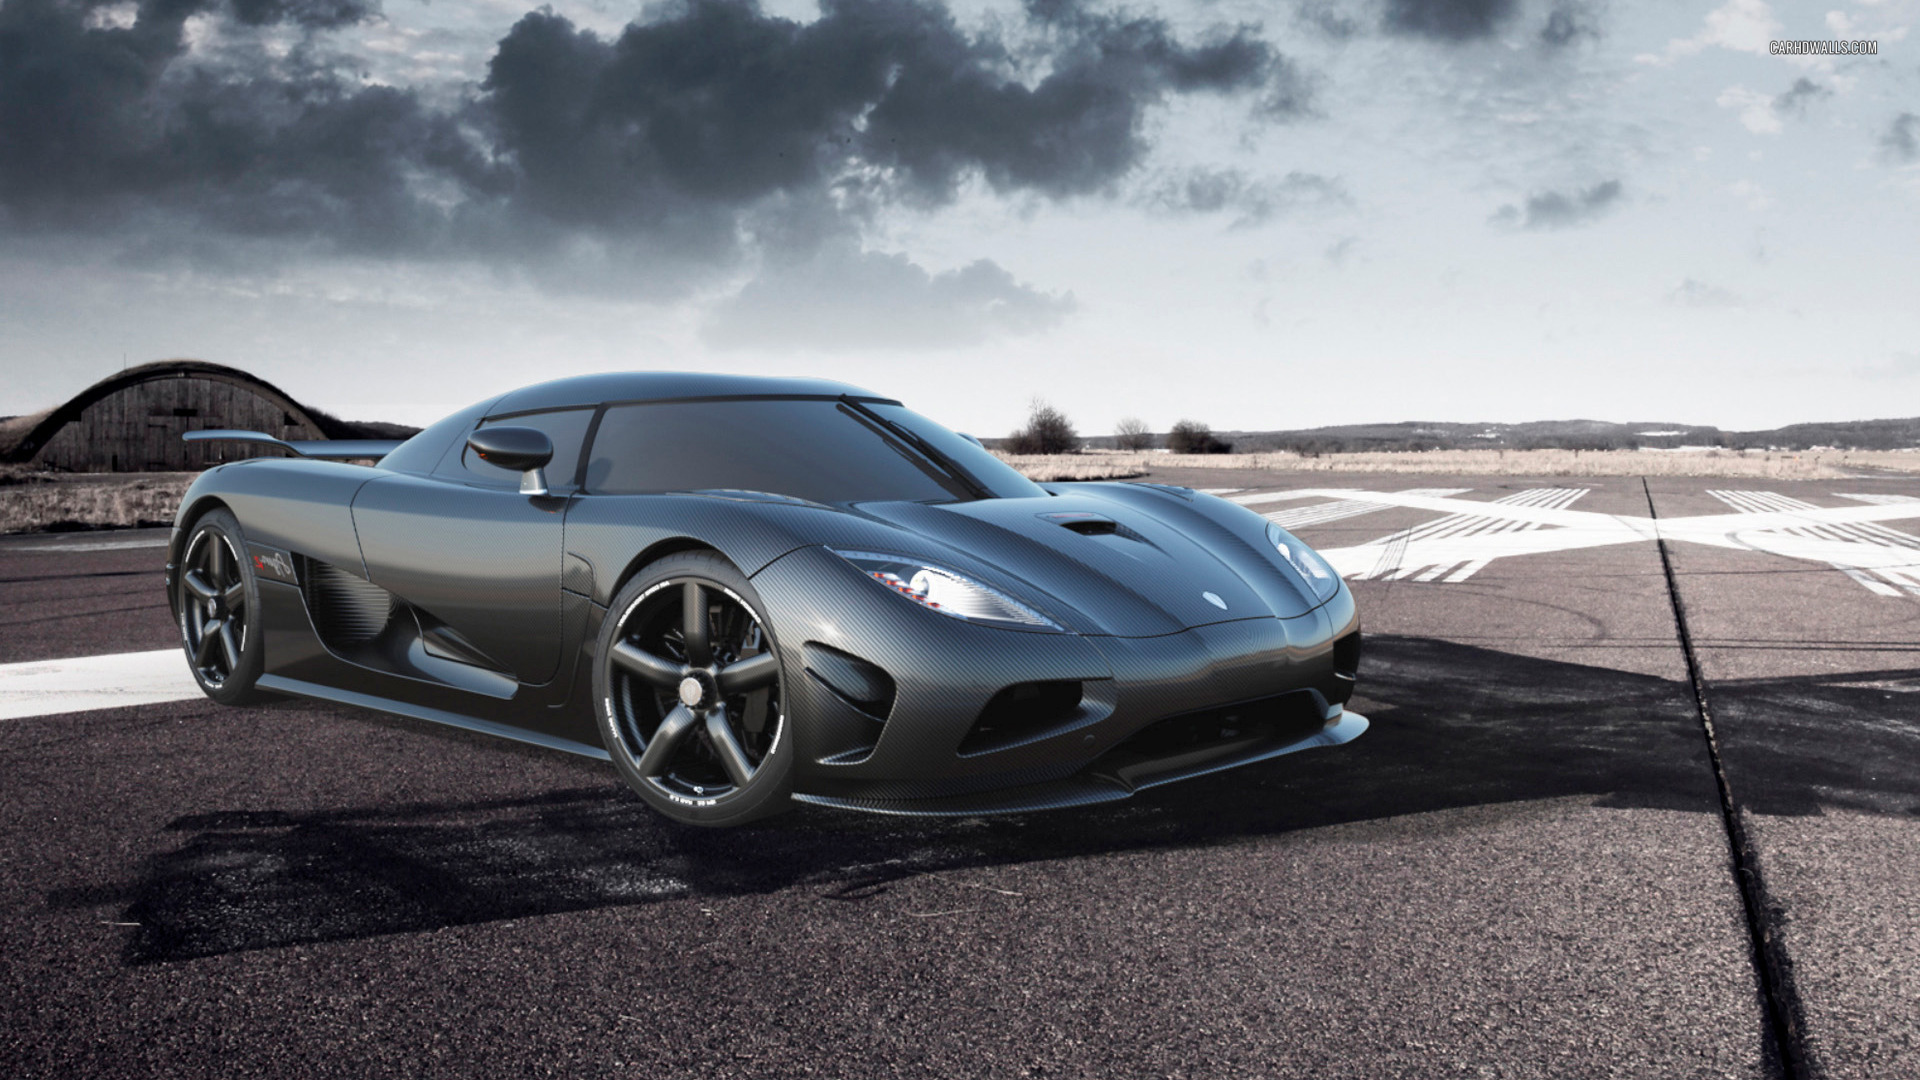 Pictures of Koenigsegg Agera R HD, 1920x1080 px, 03/09/2016